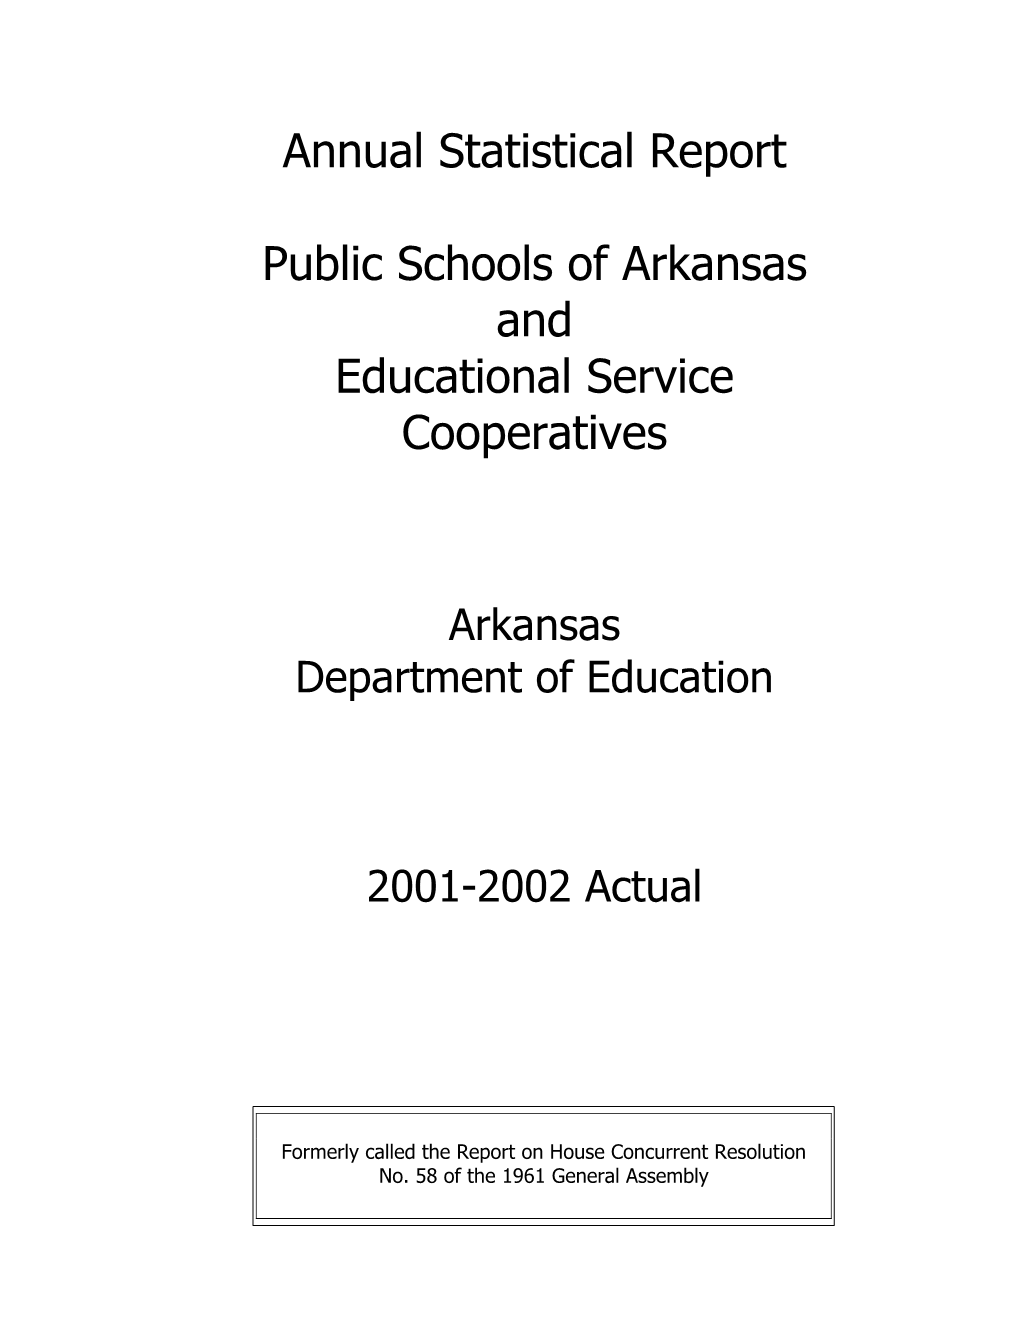 Annual Statistical Report Public Schools of Arkansas and Educational Service Cooperatives